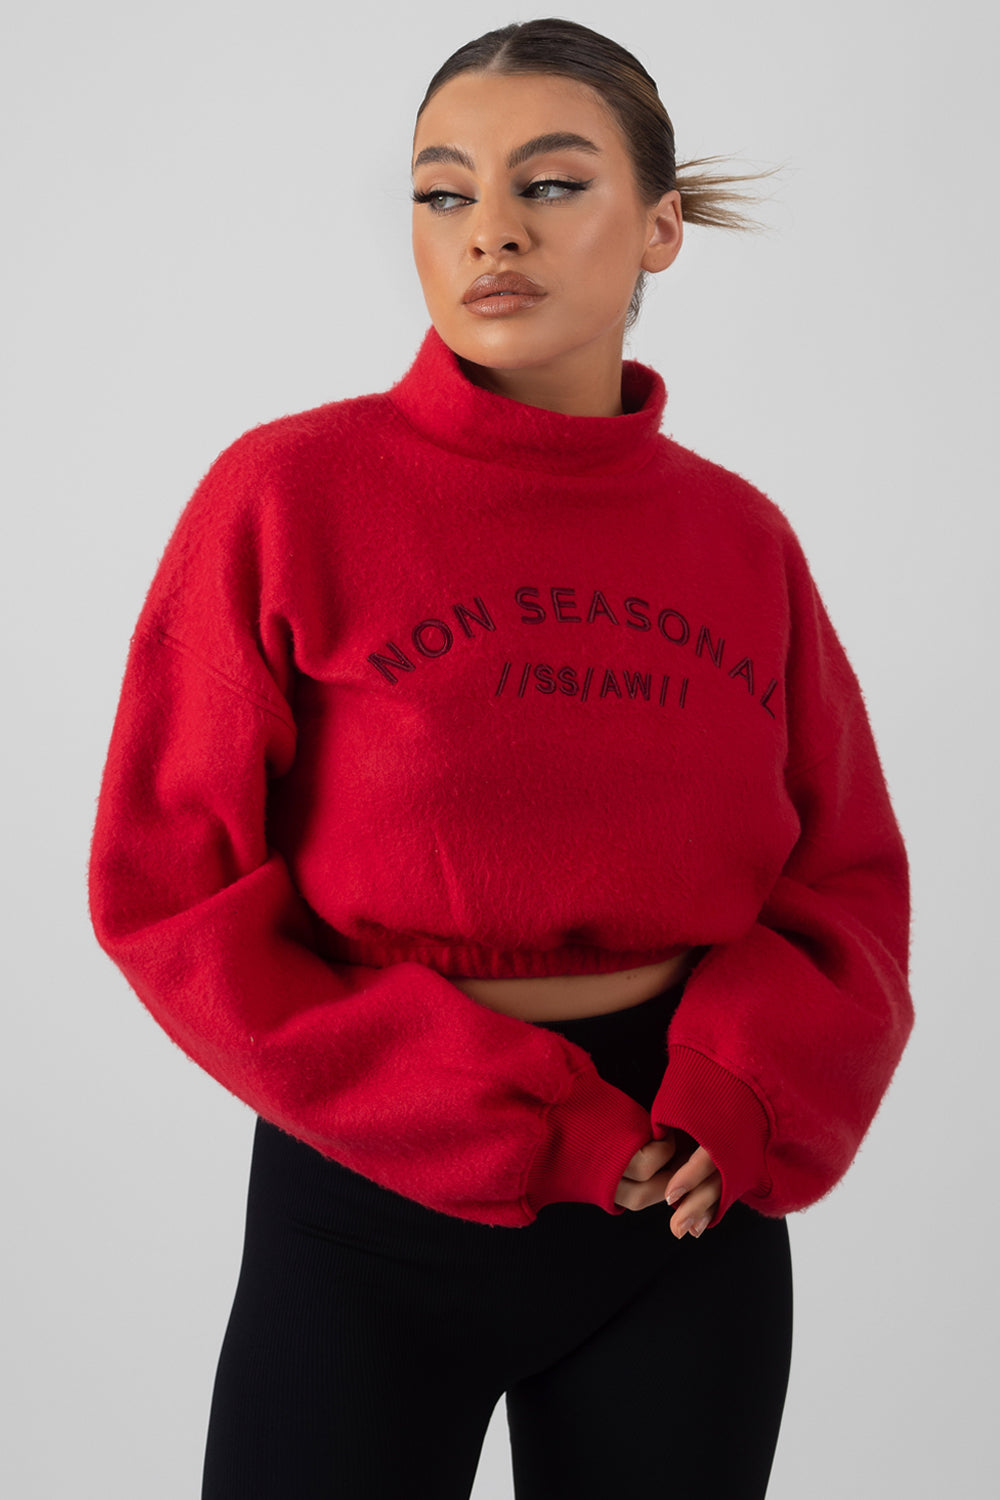 This red cropped jumper from a Thistle and Spire advert? : r/findfashion